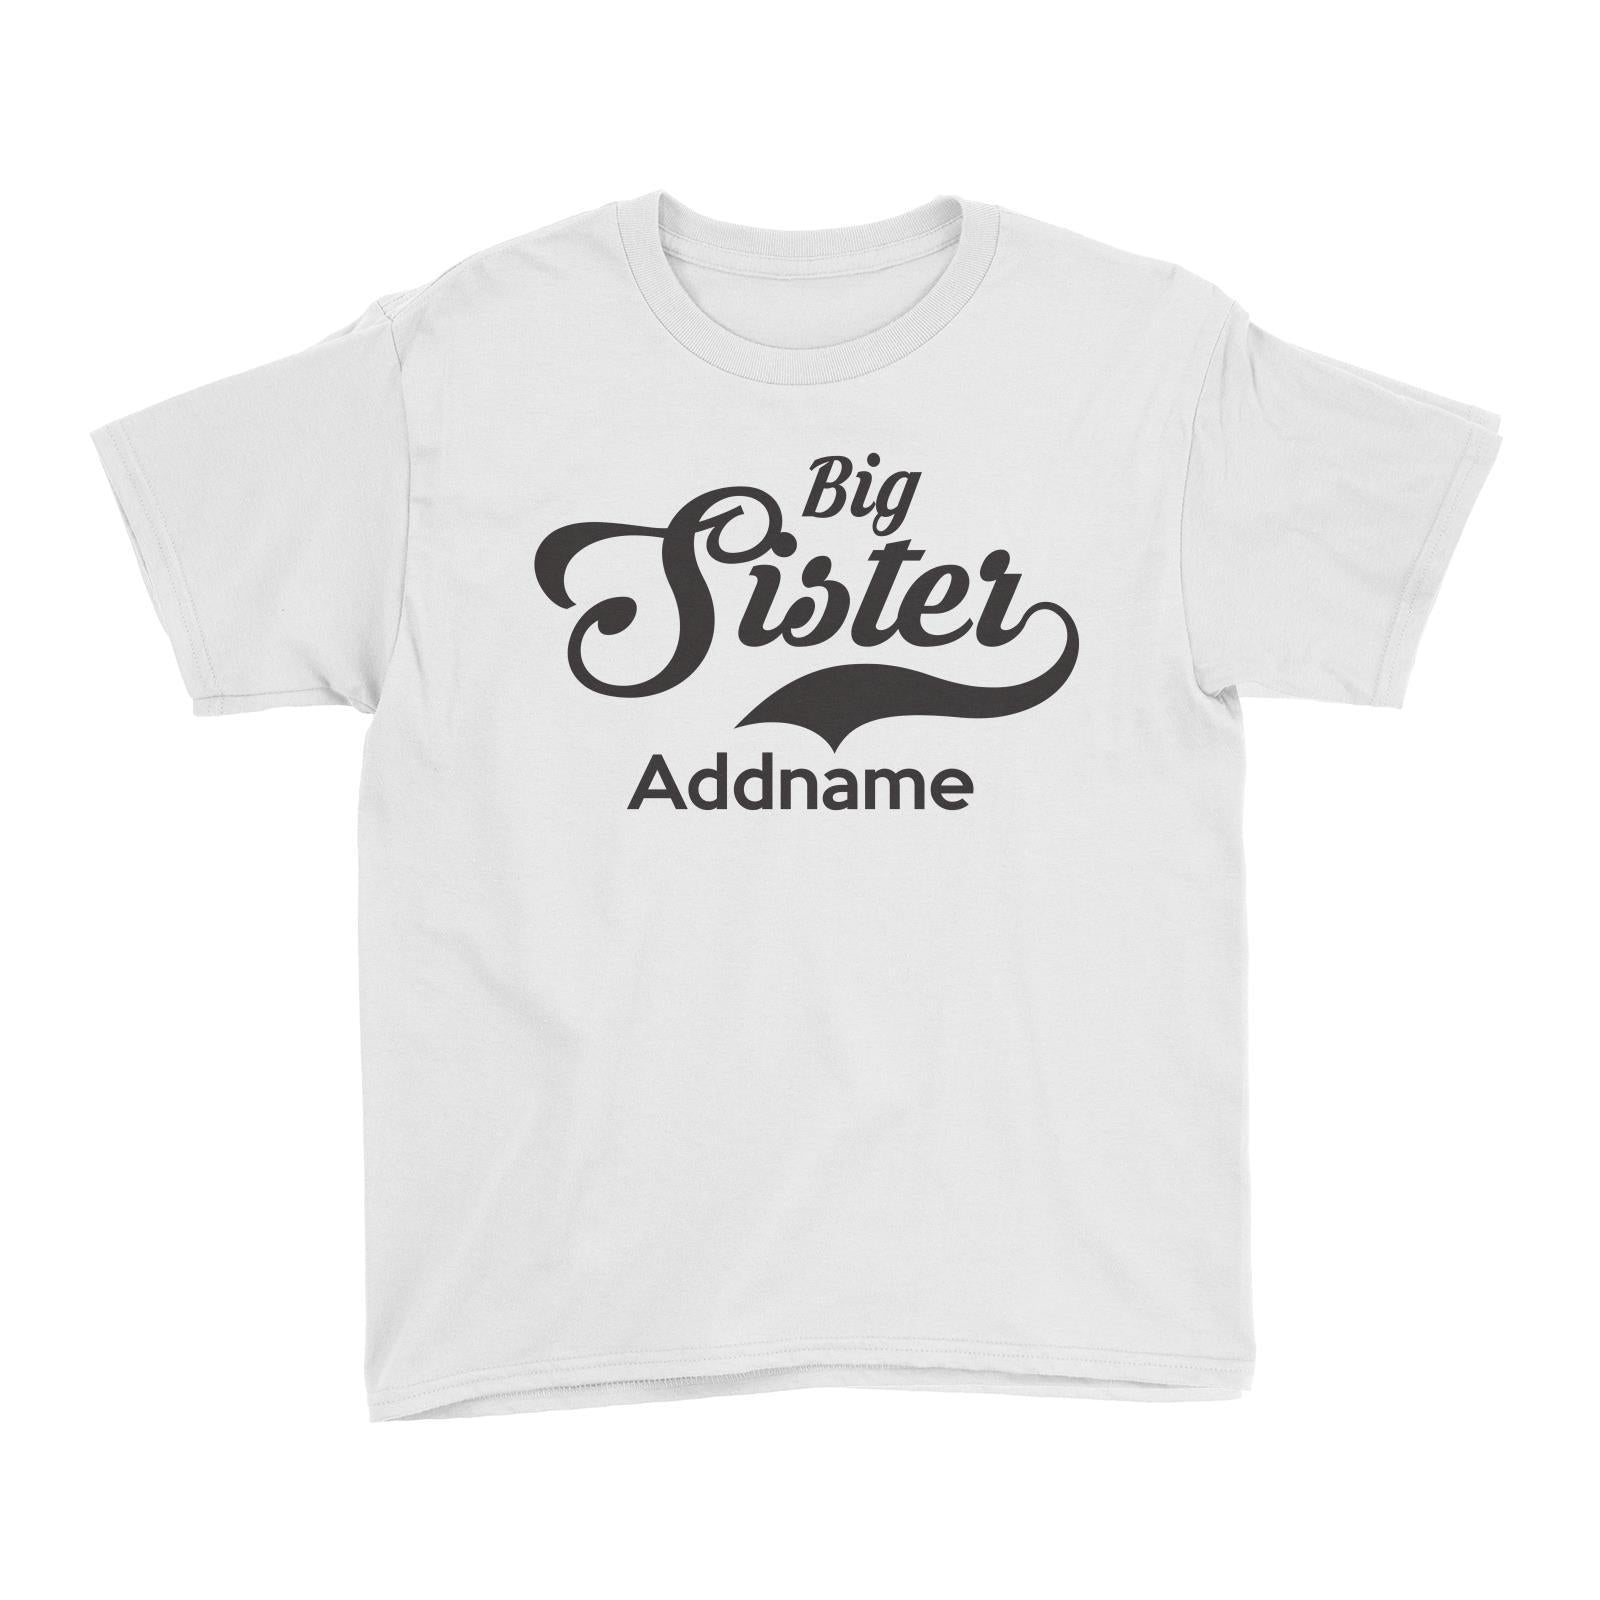 Retro Big Sister Addname Kid's T-Shirt  Matching Family Personalizable Designs